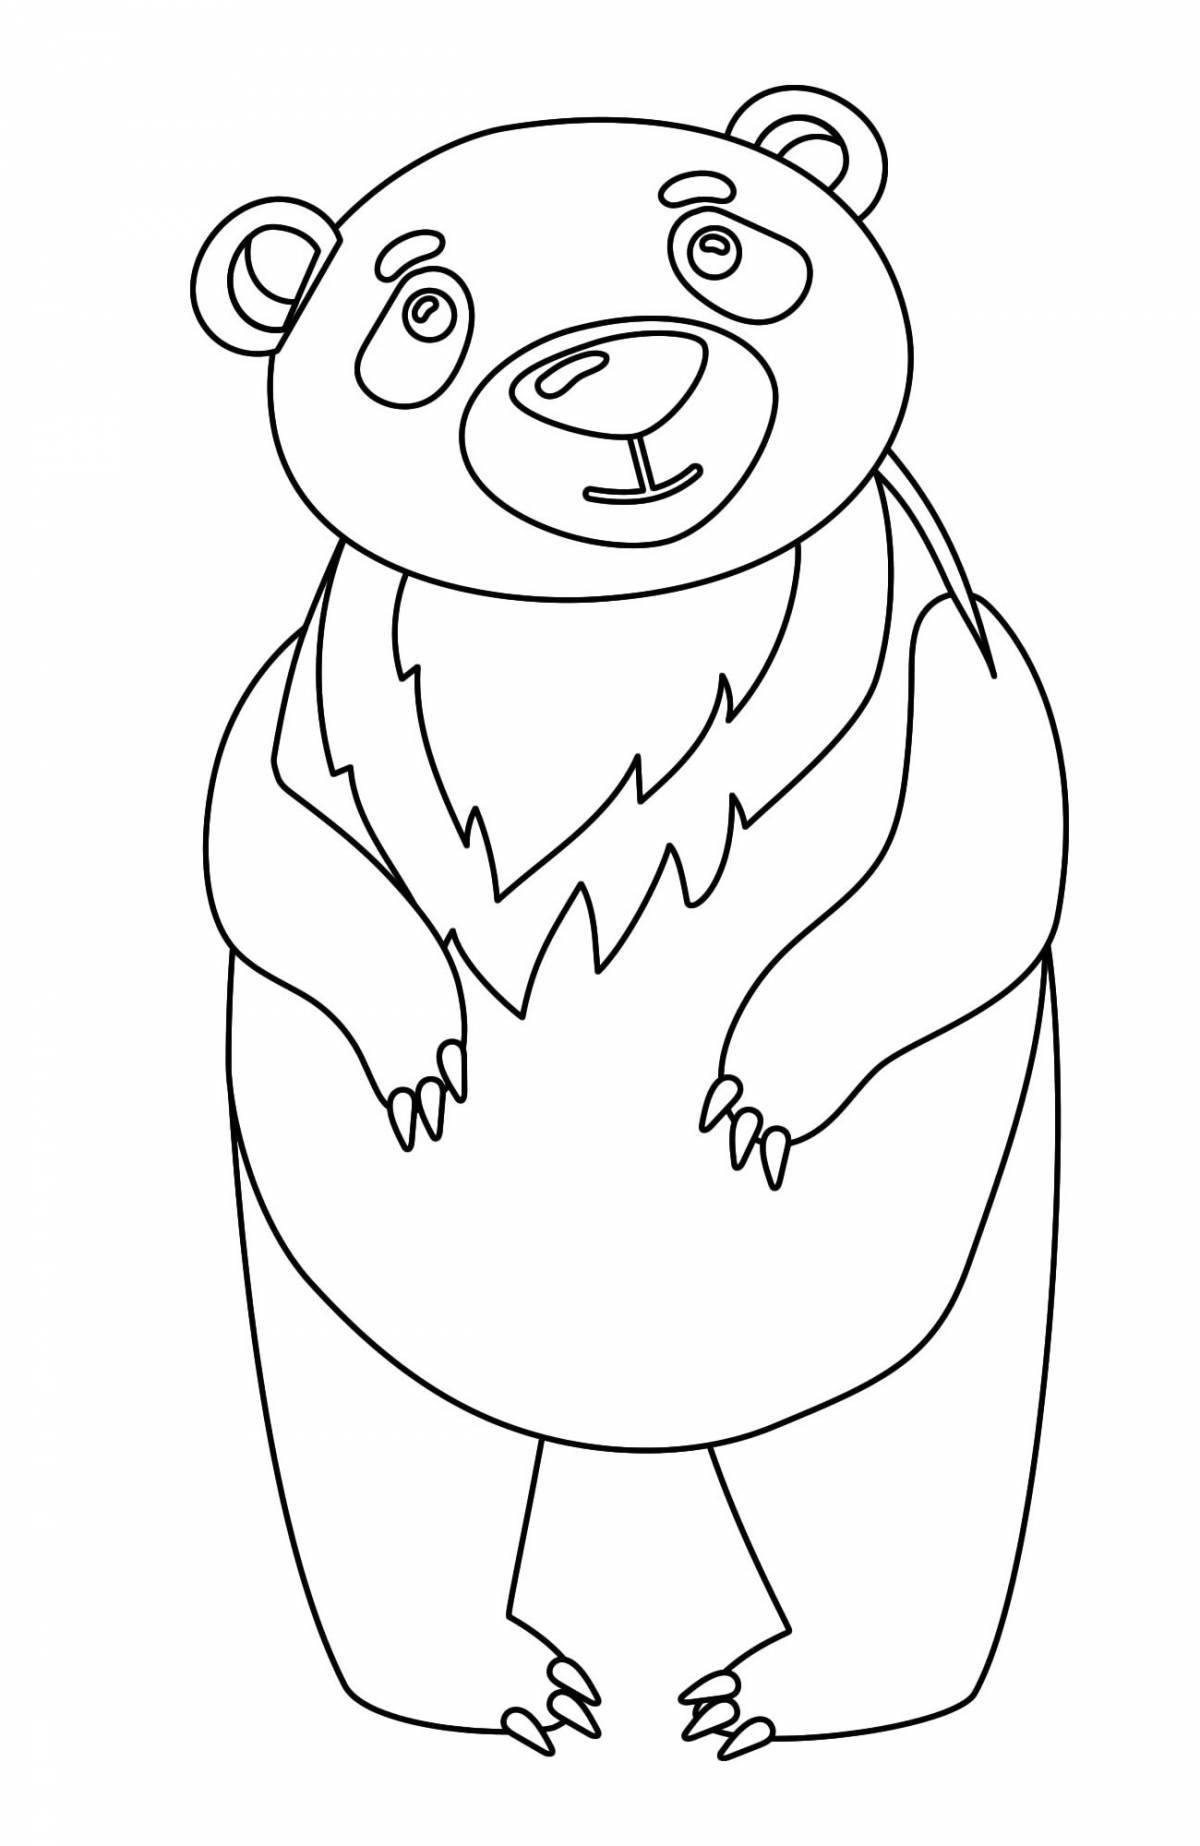 Magical polar bear coloring book for 3-4 year olds